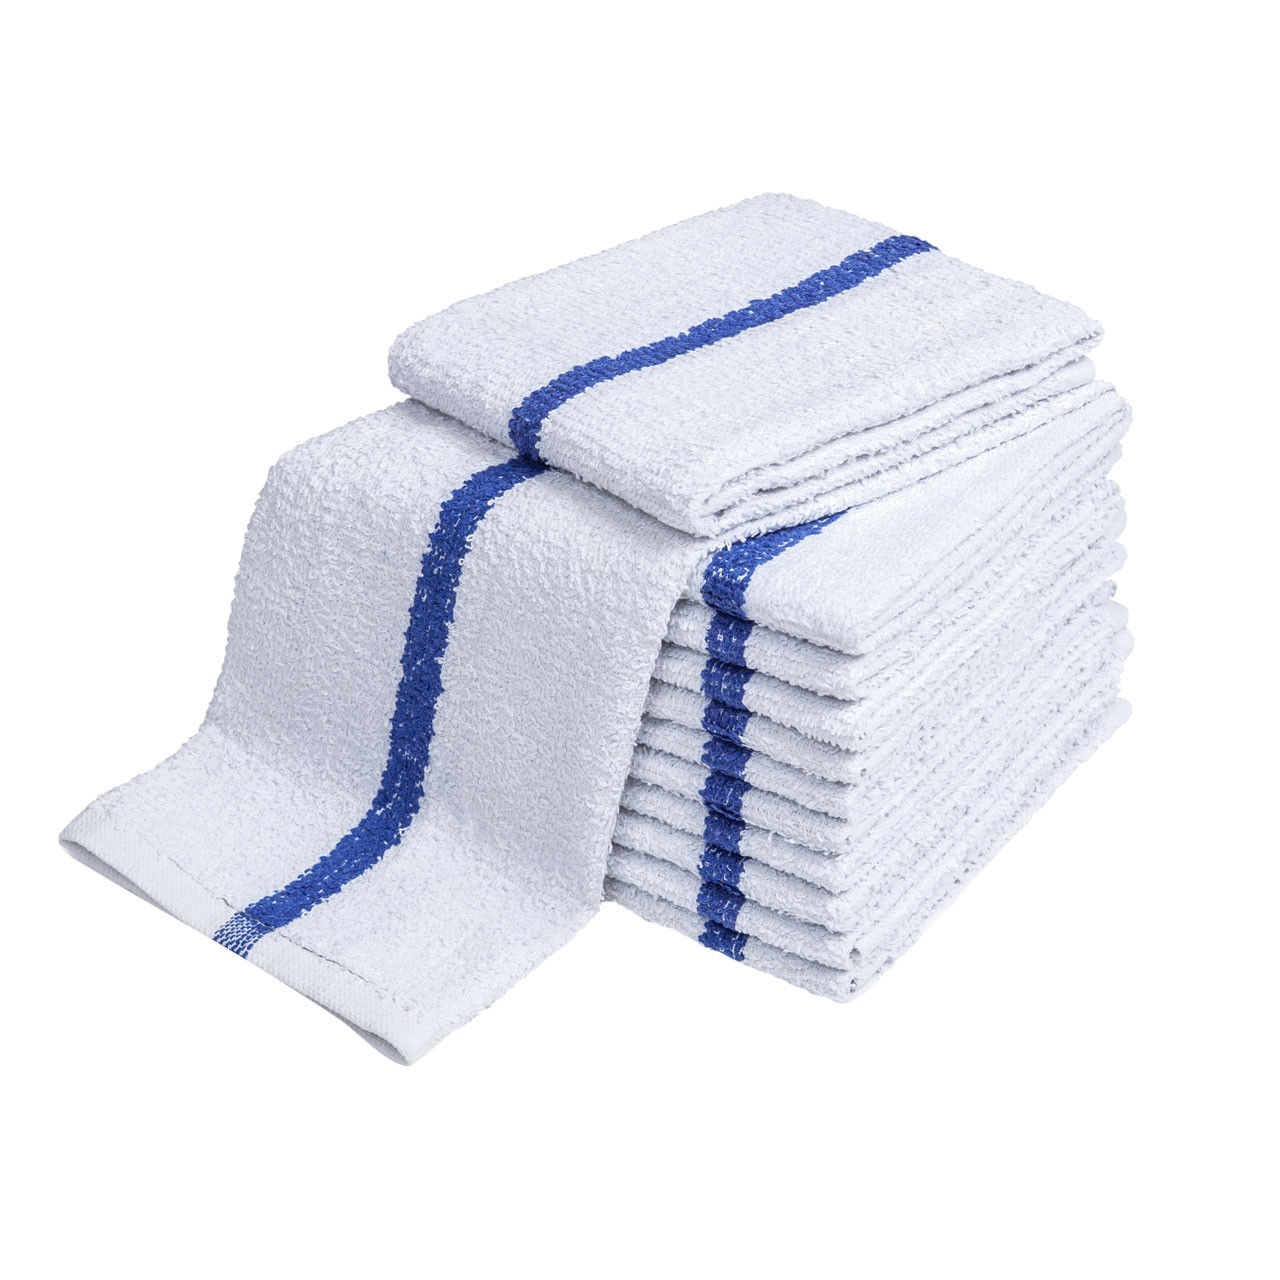 What is the packaging method used for these ADI bar towels, Full Terry, Center Stripe?